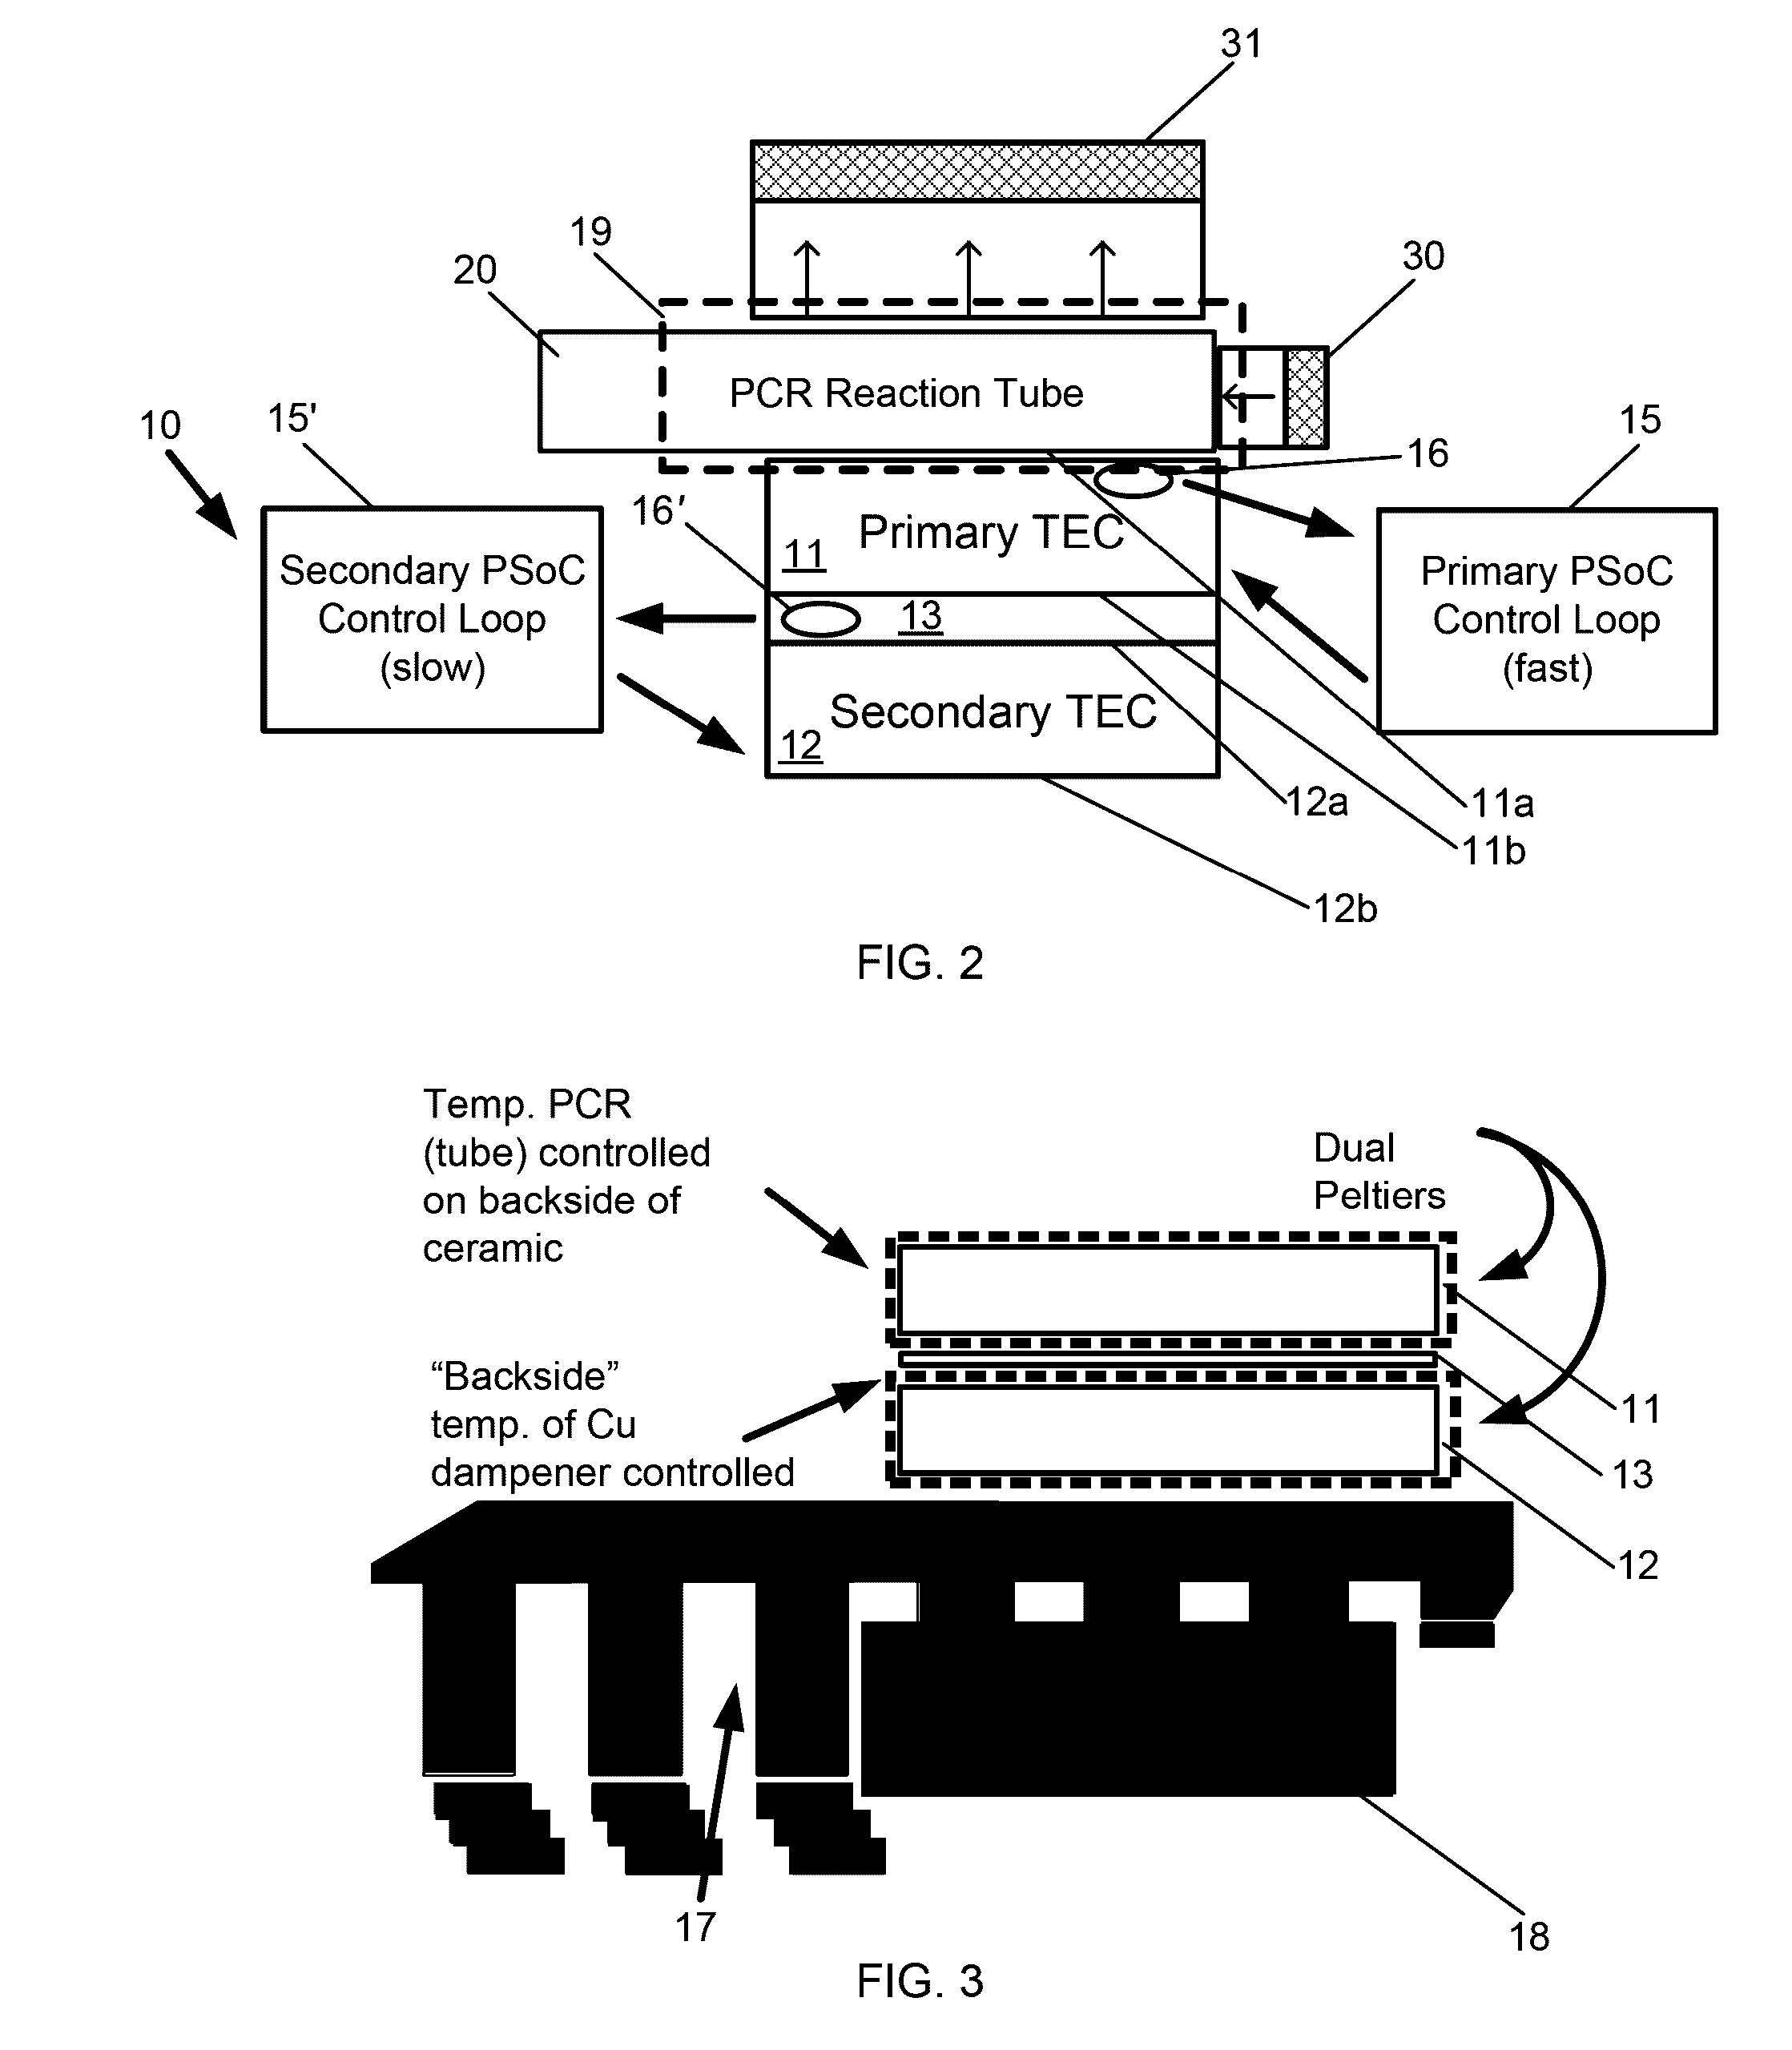 Thermal control device and methods of use